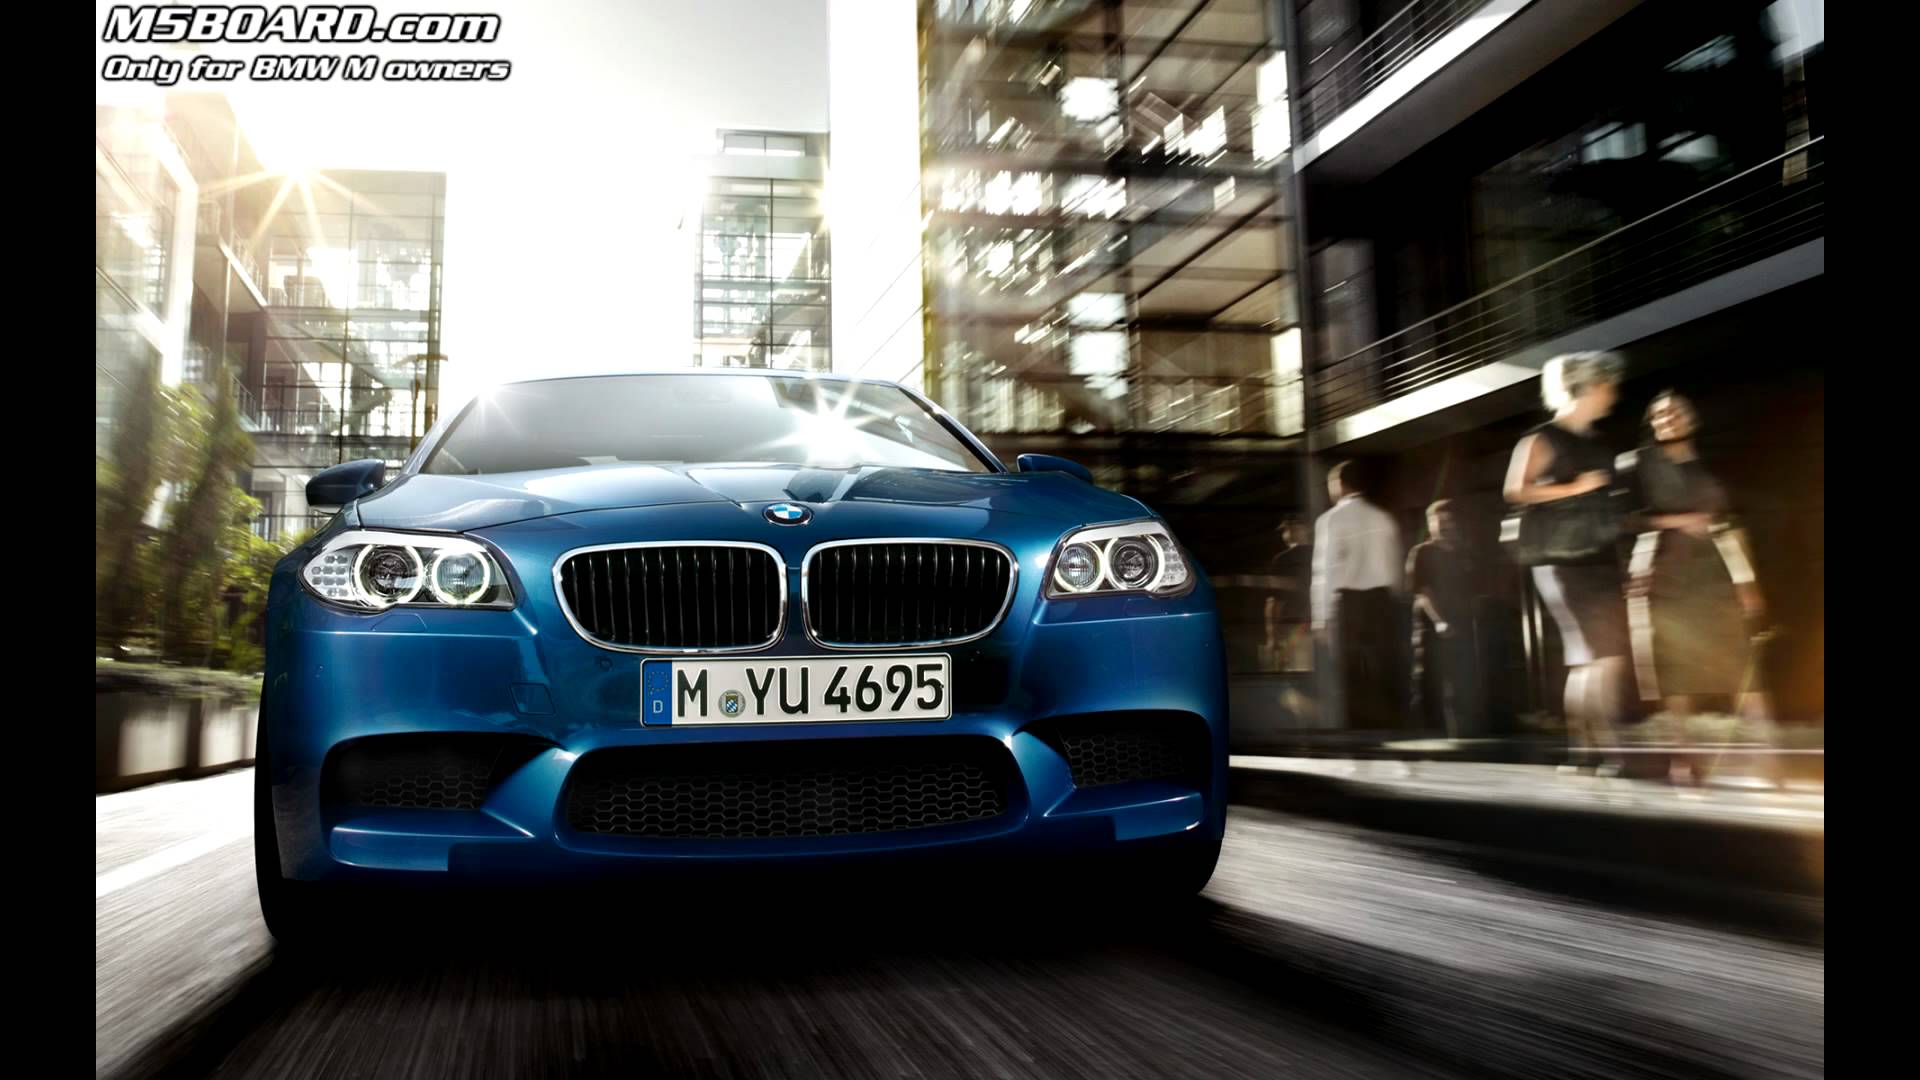 BMW M5 F10 official Wallpaper from BMW